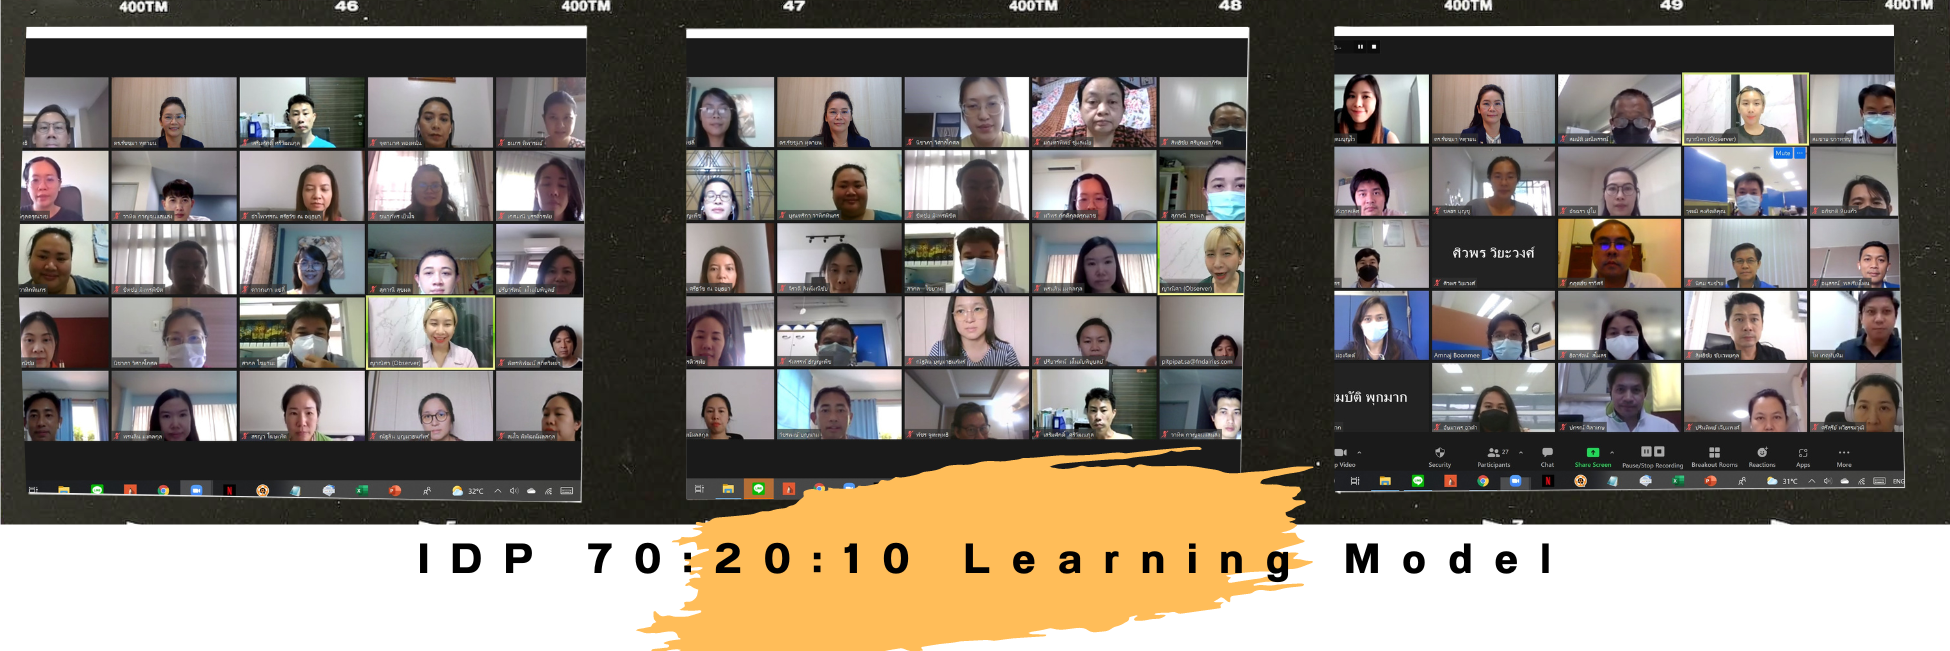 IDP 702010 Learning Model แบนเนอ์ใน.png (1.25 MB)